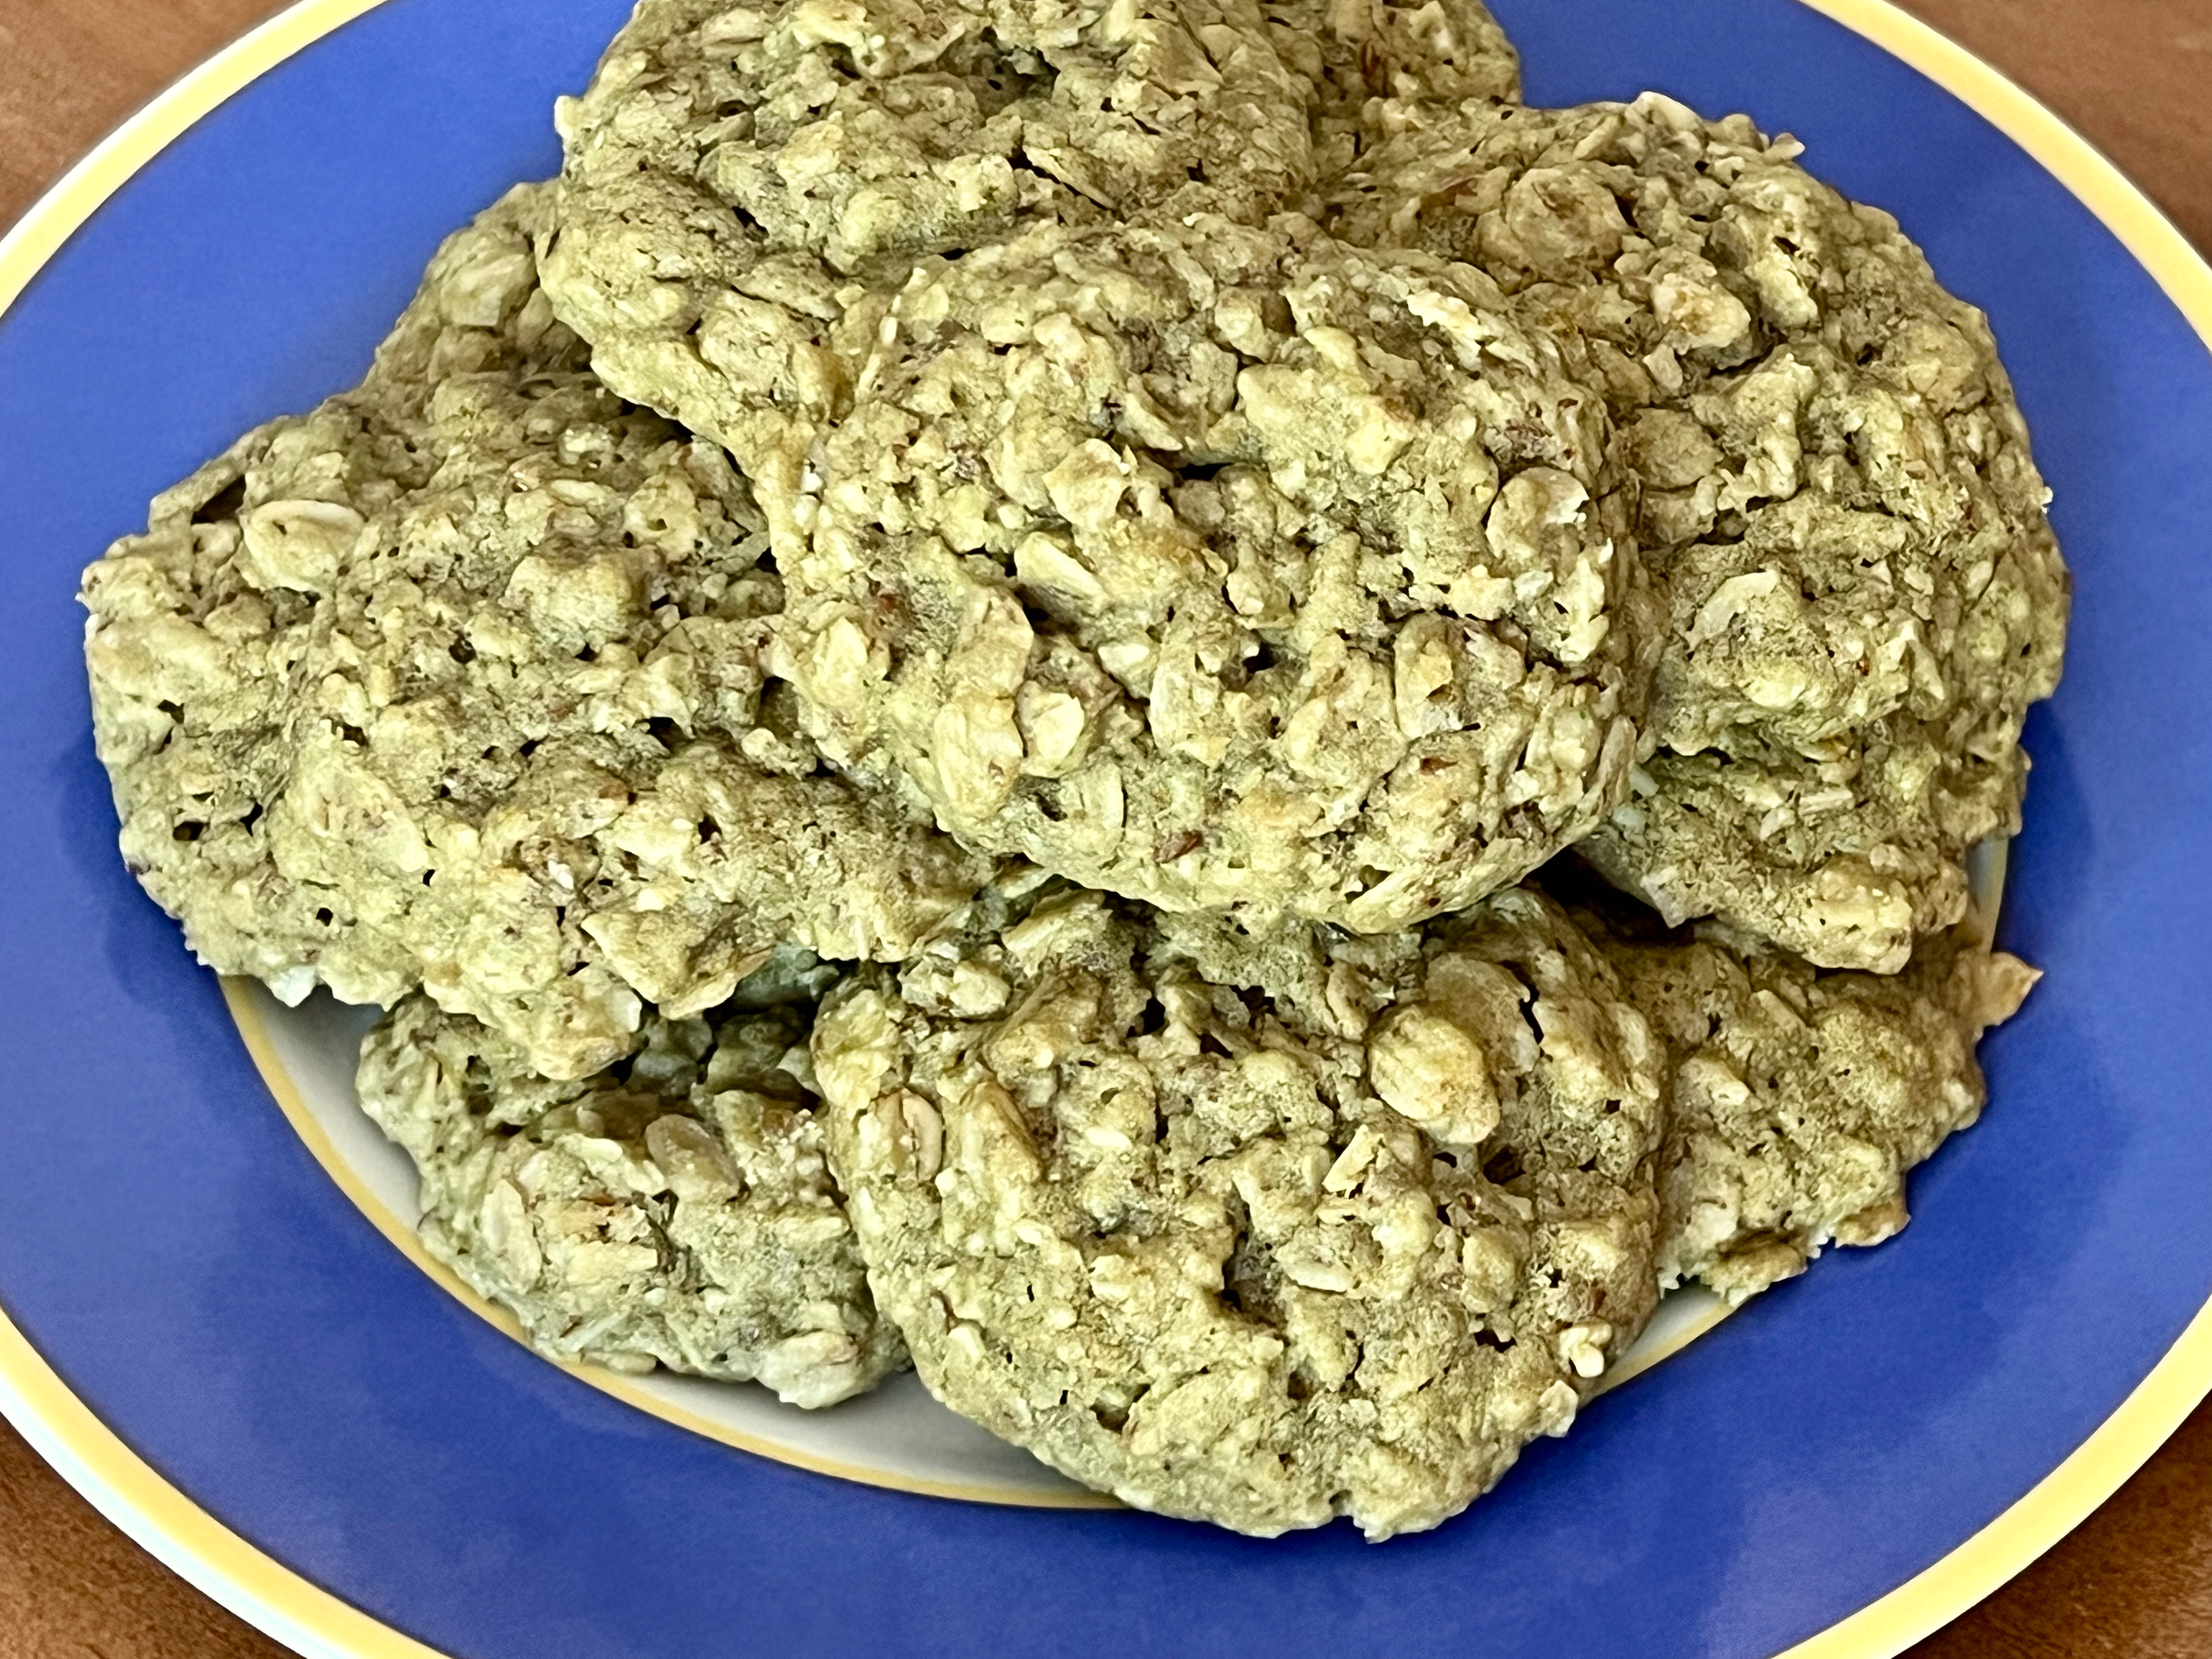 A plate of slightly green oatmeal cookies.